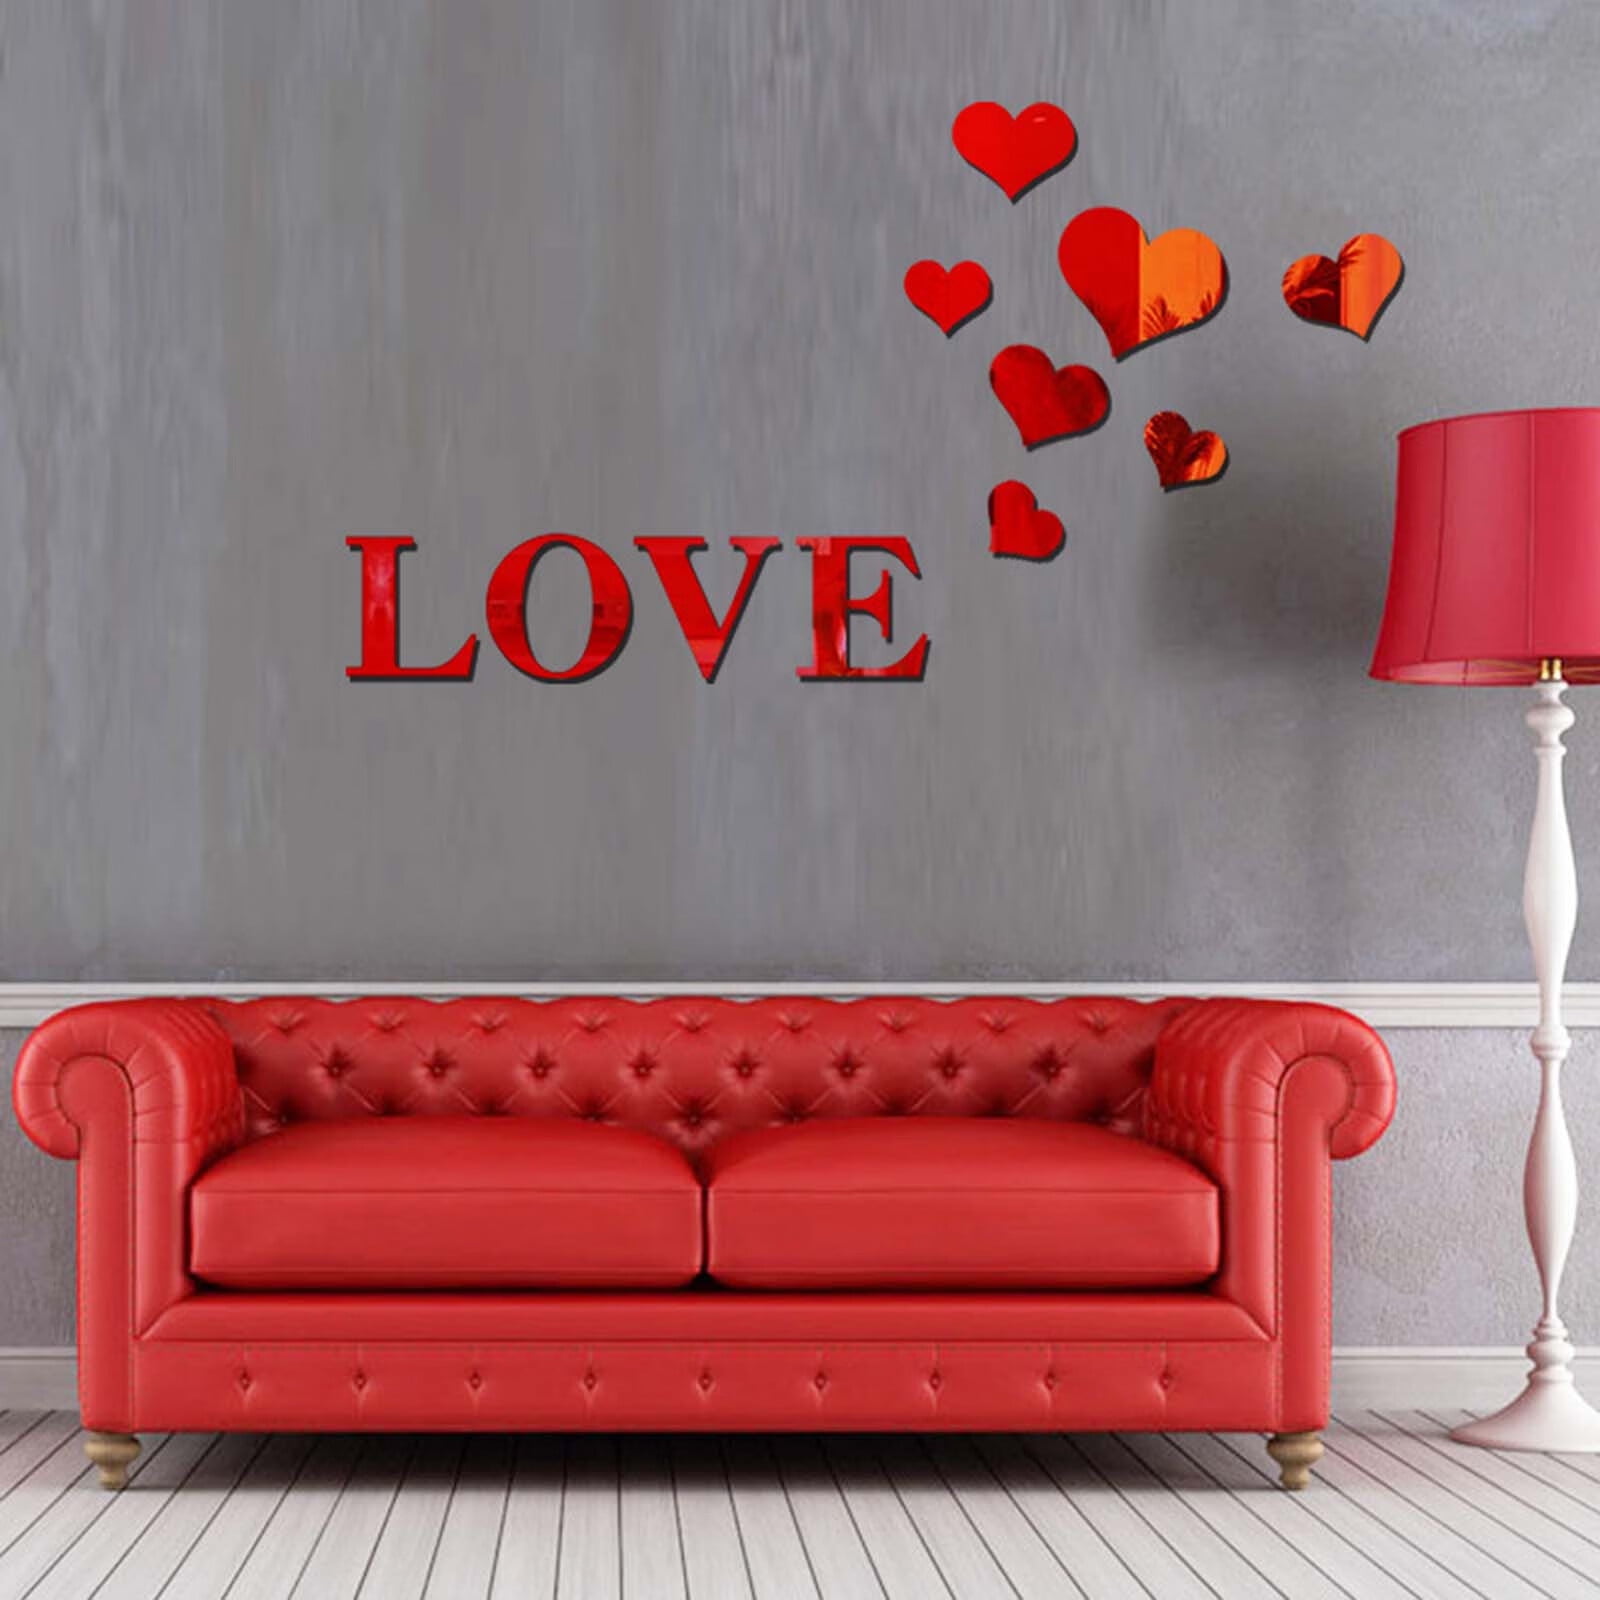 Follure Home Decor Wall Stickers Acrylic Love Mirror Sticker Bedroom Living Room Removable Wall 2186